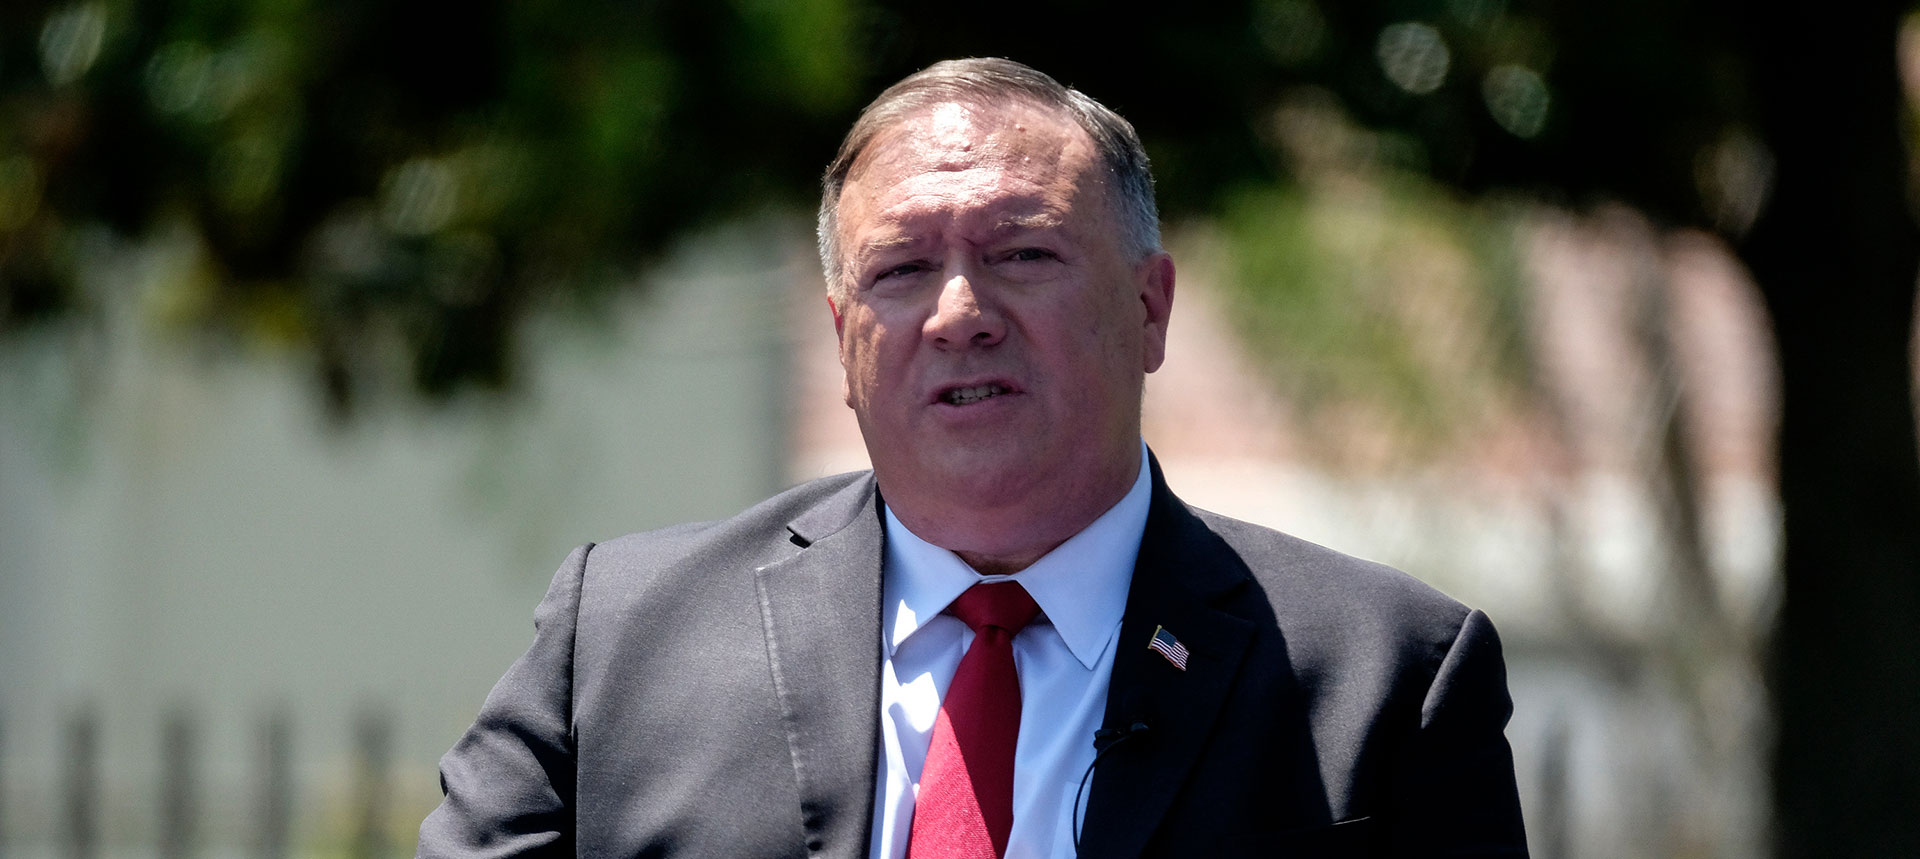 Peter Isackson Daily Devil’s Dictionary, Mike Pompeo news, Secretary of State Mike Pompeo, Mike Pompeo legacy, Mike Pompeo Iran, Mike Pompeo axis of evil, Mike Pompeo al-Qaeda, Mike Pompeo Donald Trump legacy, Mike Pompeo State Department legacy, Mike Pompeo political future